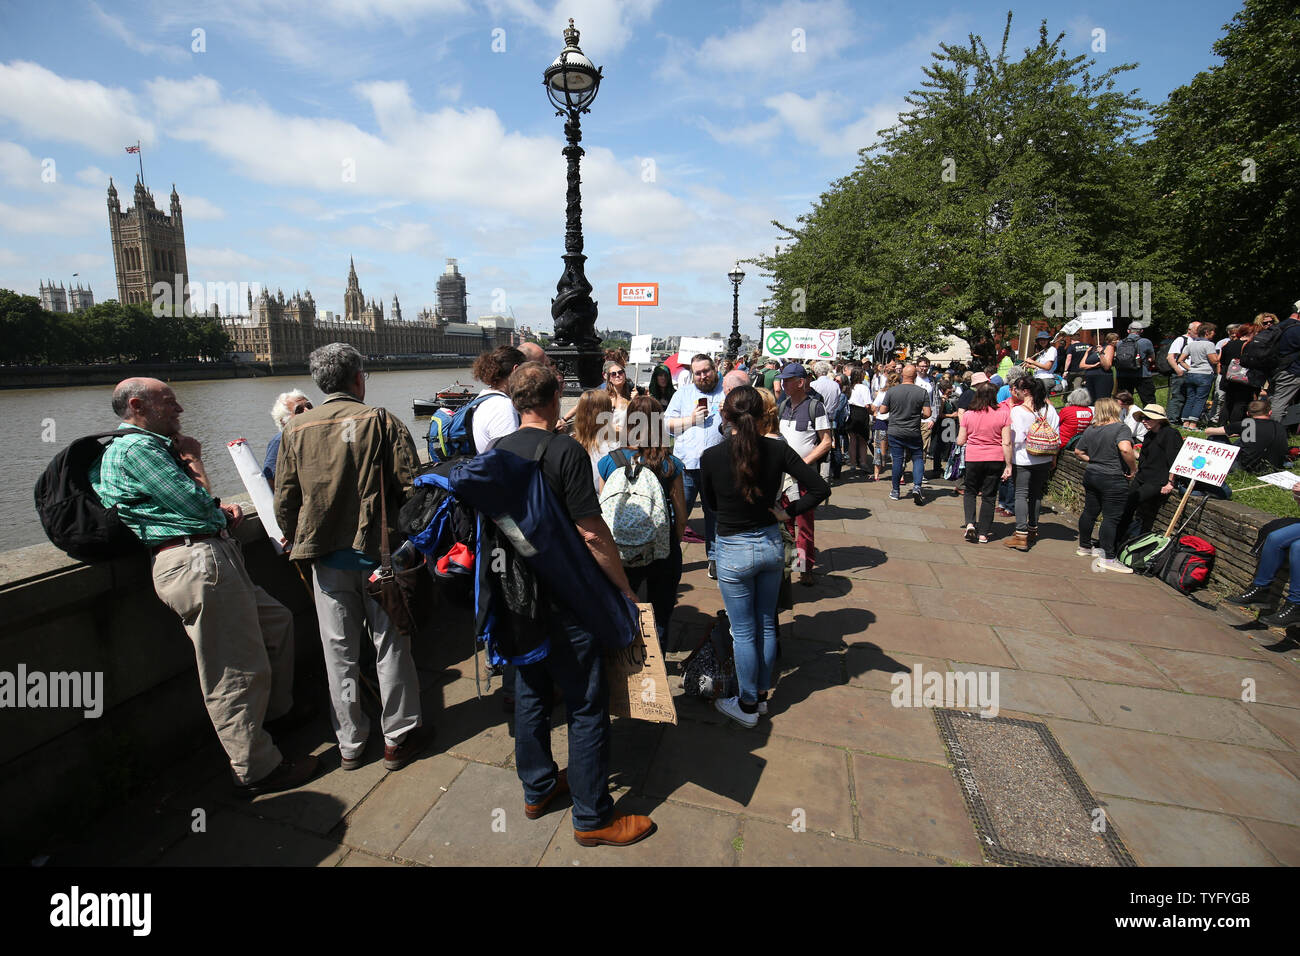 Climate activists gather on the Albert Embankment, adjacent to Lambeth Palace, as they make their way to join the lobby of Parliament on taking action on climate change and environmental protection in Parliament Square, Westminster, London. Stock Photo